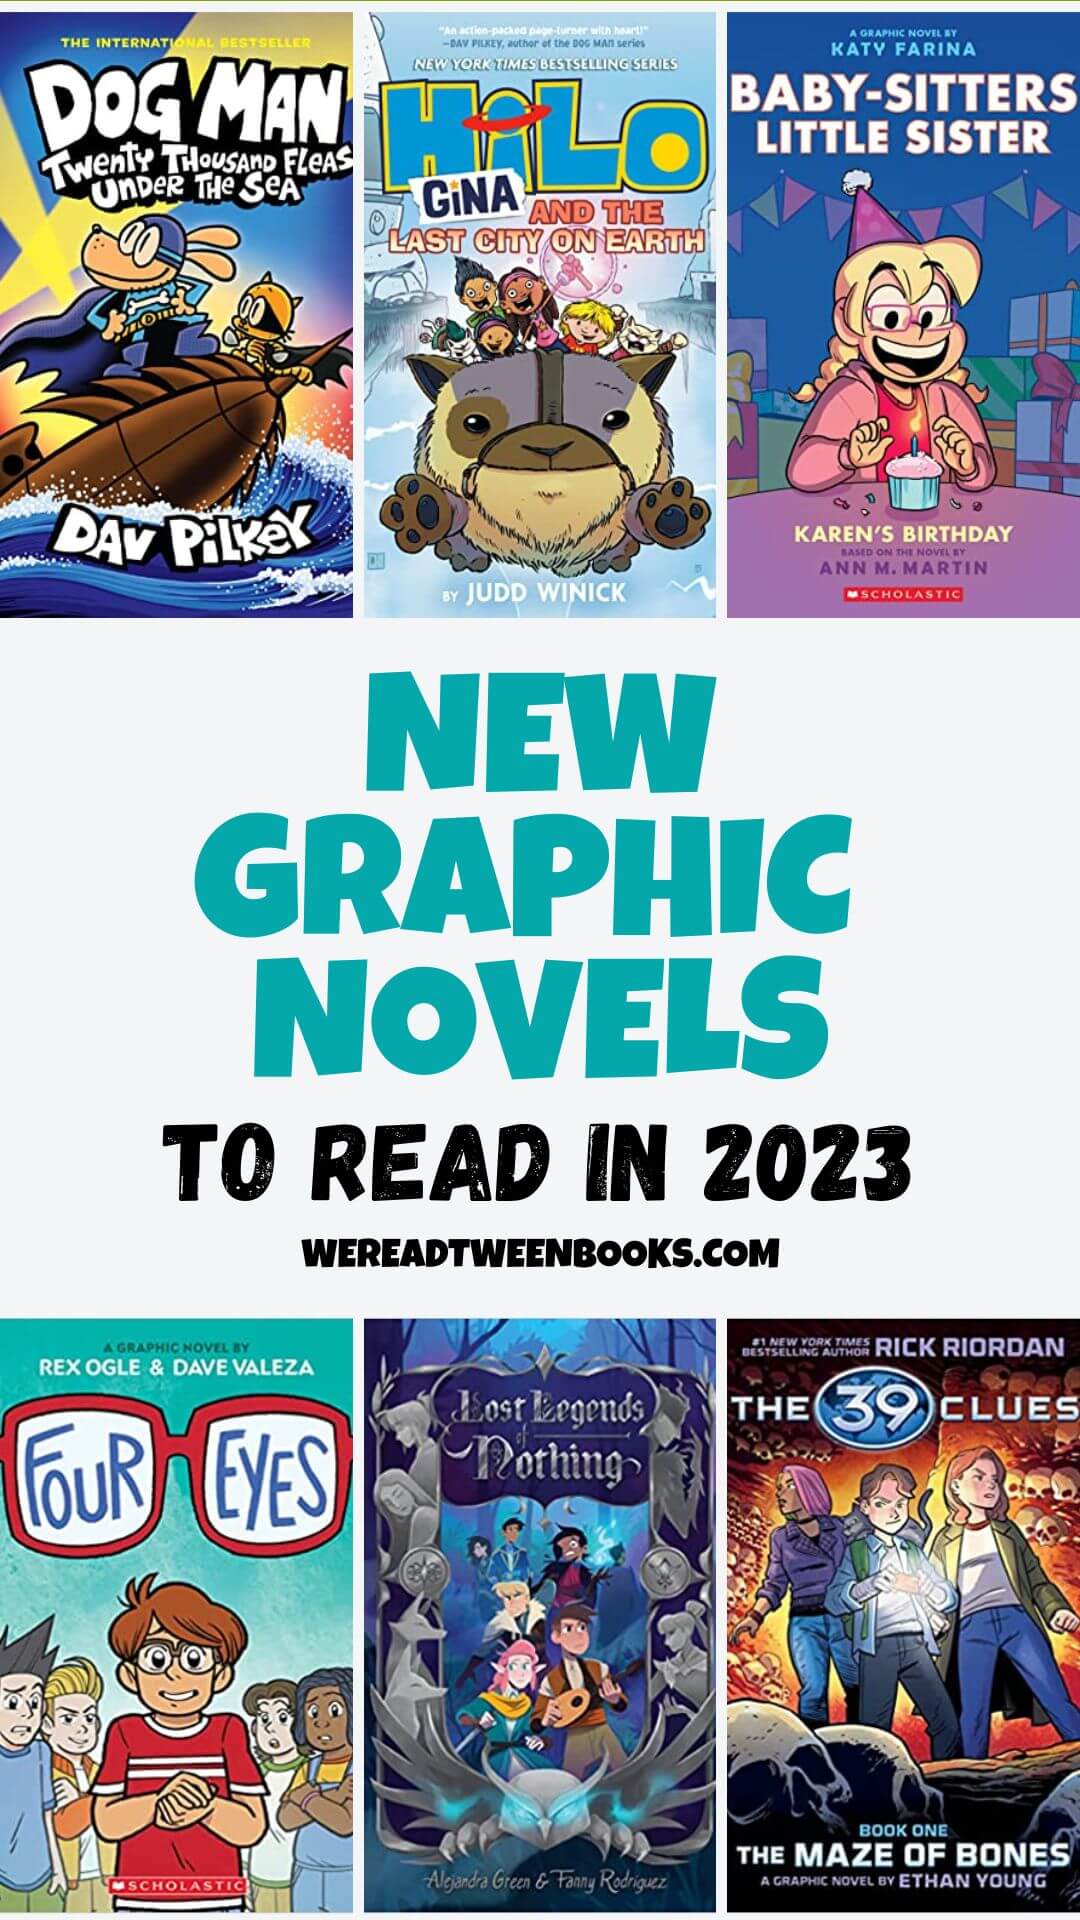 Check out the ultimate book list of new graphic novels for tweens and kids releasing in 2023 from book bloggers, We Read Tween Books.